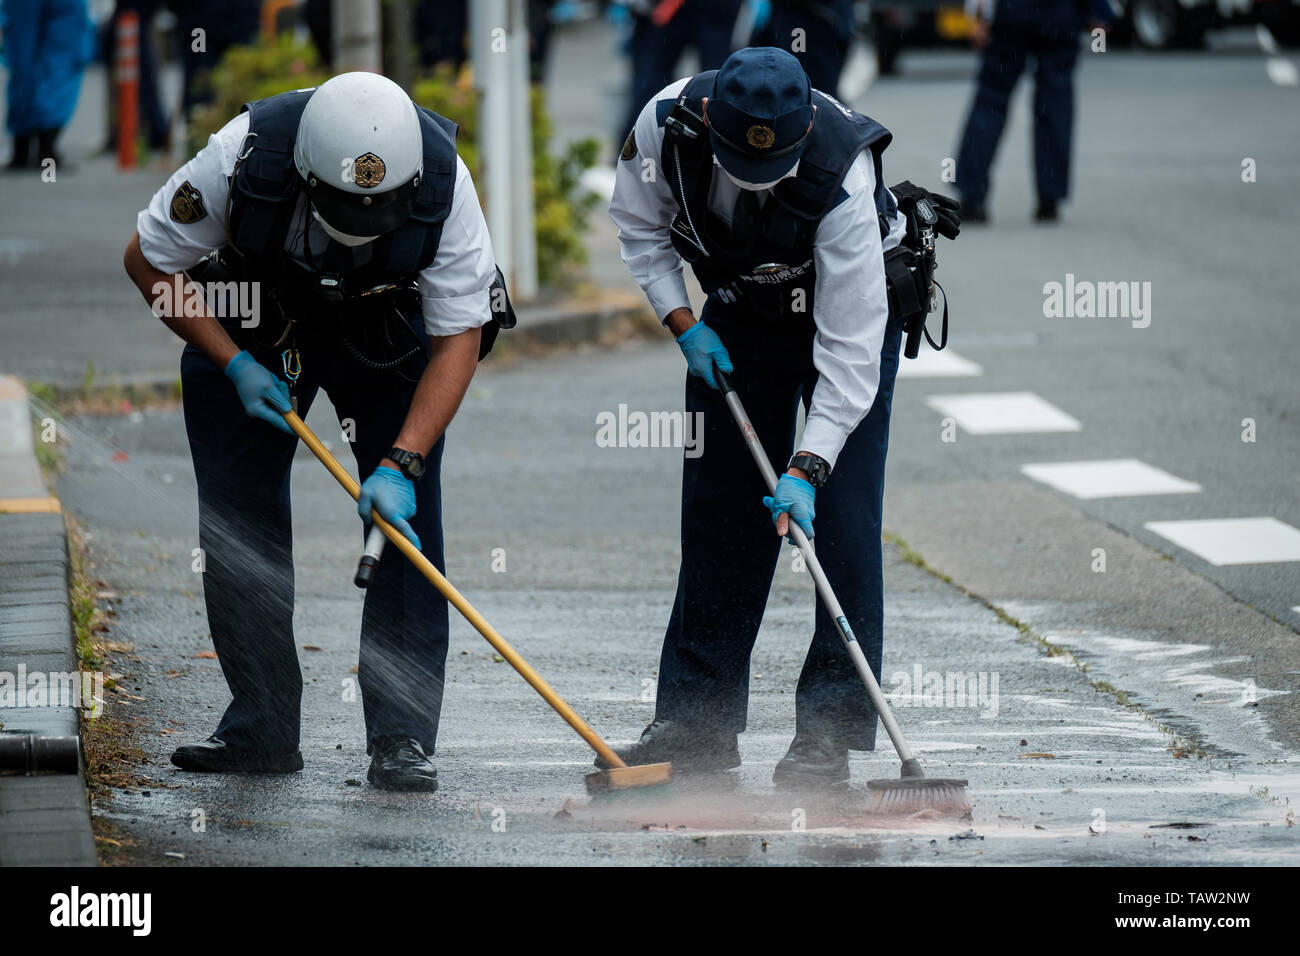 A police officer Kanagawa cleans the road after mass stabbing close to Noborito station on 28, 2019 in Kawasaki, Japan. According to media reports, 16 people, including elementary